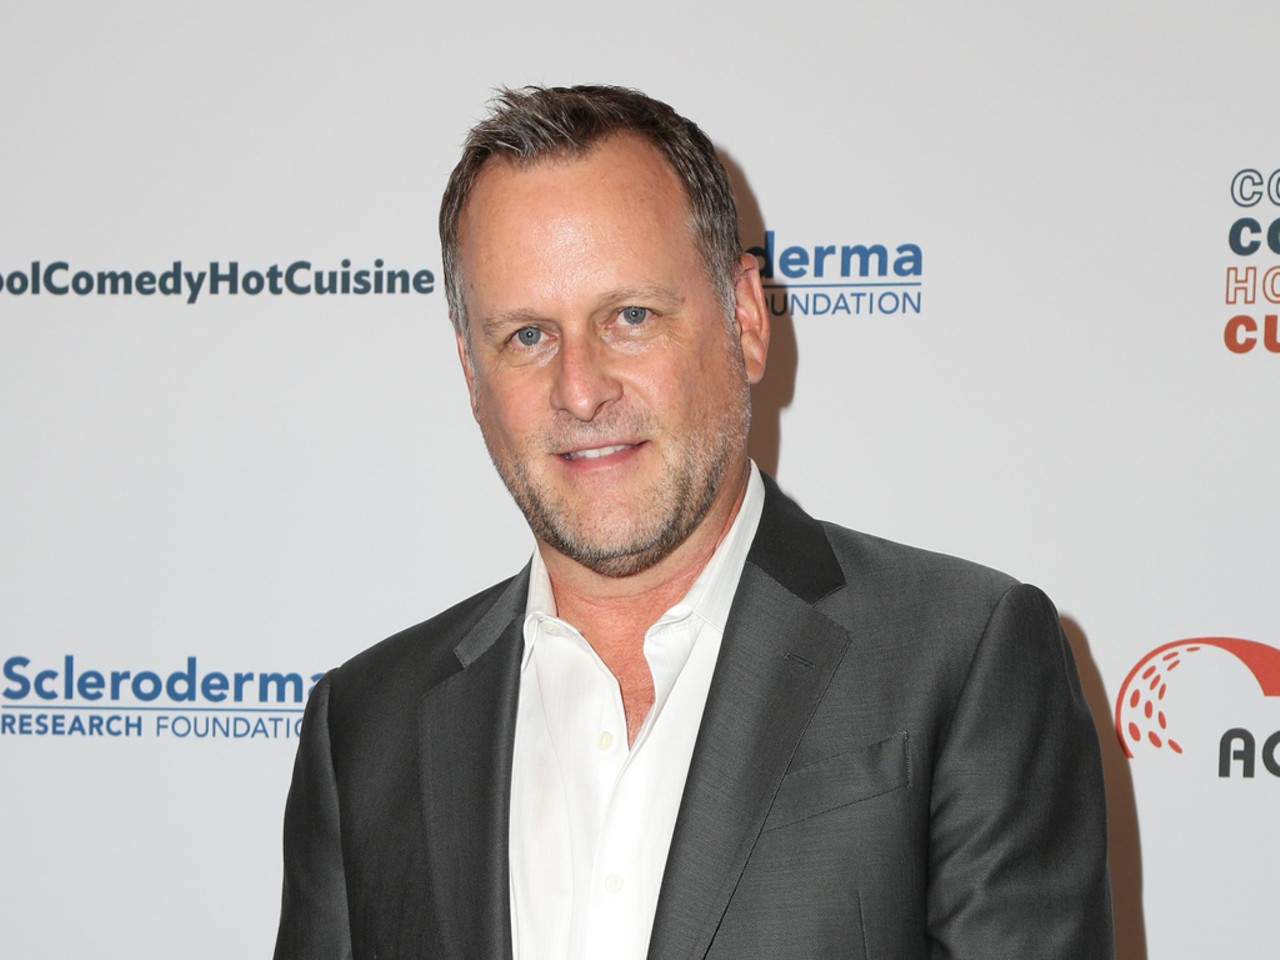 Dave Coulier | Uncle Joey DILF 
If you thought Dave&#146;s infamous &#147;cut it out&#148; catchphrase ended in 1995, think again. Aspects of Joey can be found sprinkled throughout his Instagram and Twitter accounts, with posts featuring the hashtag #cutitout as well as photos of friends wearing his &#147;cut it out&#148; merch. At heart, Dave is still the same Uncle Joey we all fell in love with back in &#145;87.  
Kathy Hutchins / Shutterstock 